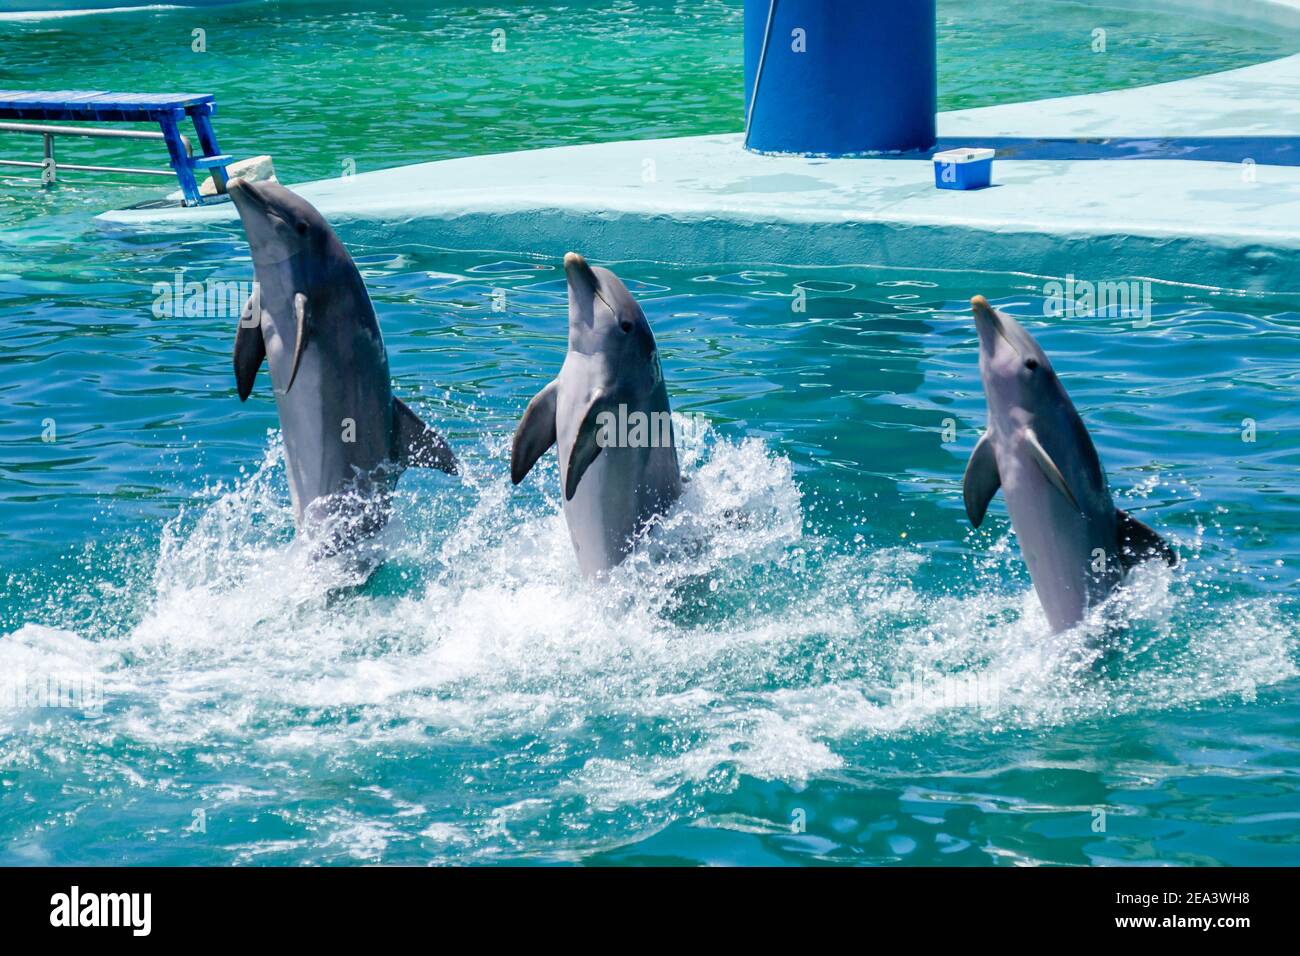 Bottlenose dolphins in an aquarium walking over the pool water backwards. Cancepto de entretenimiento. Stock Photo